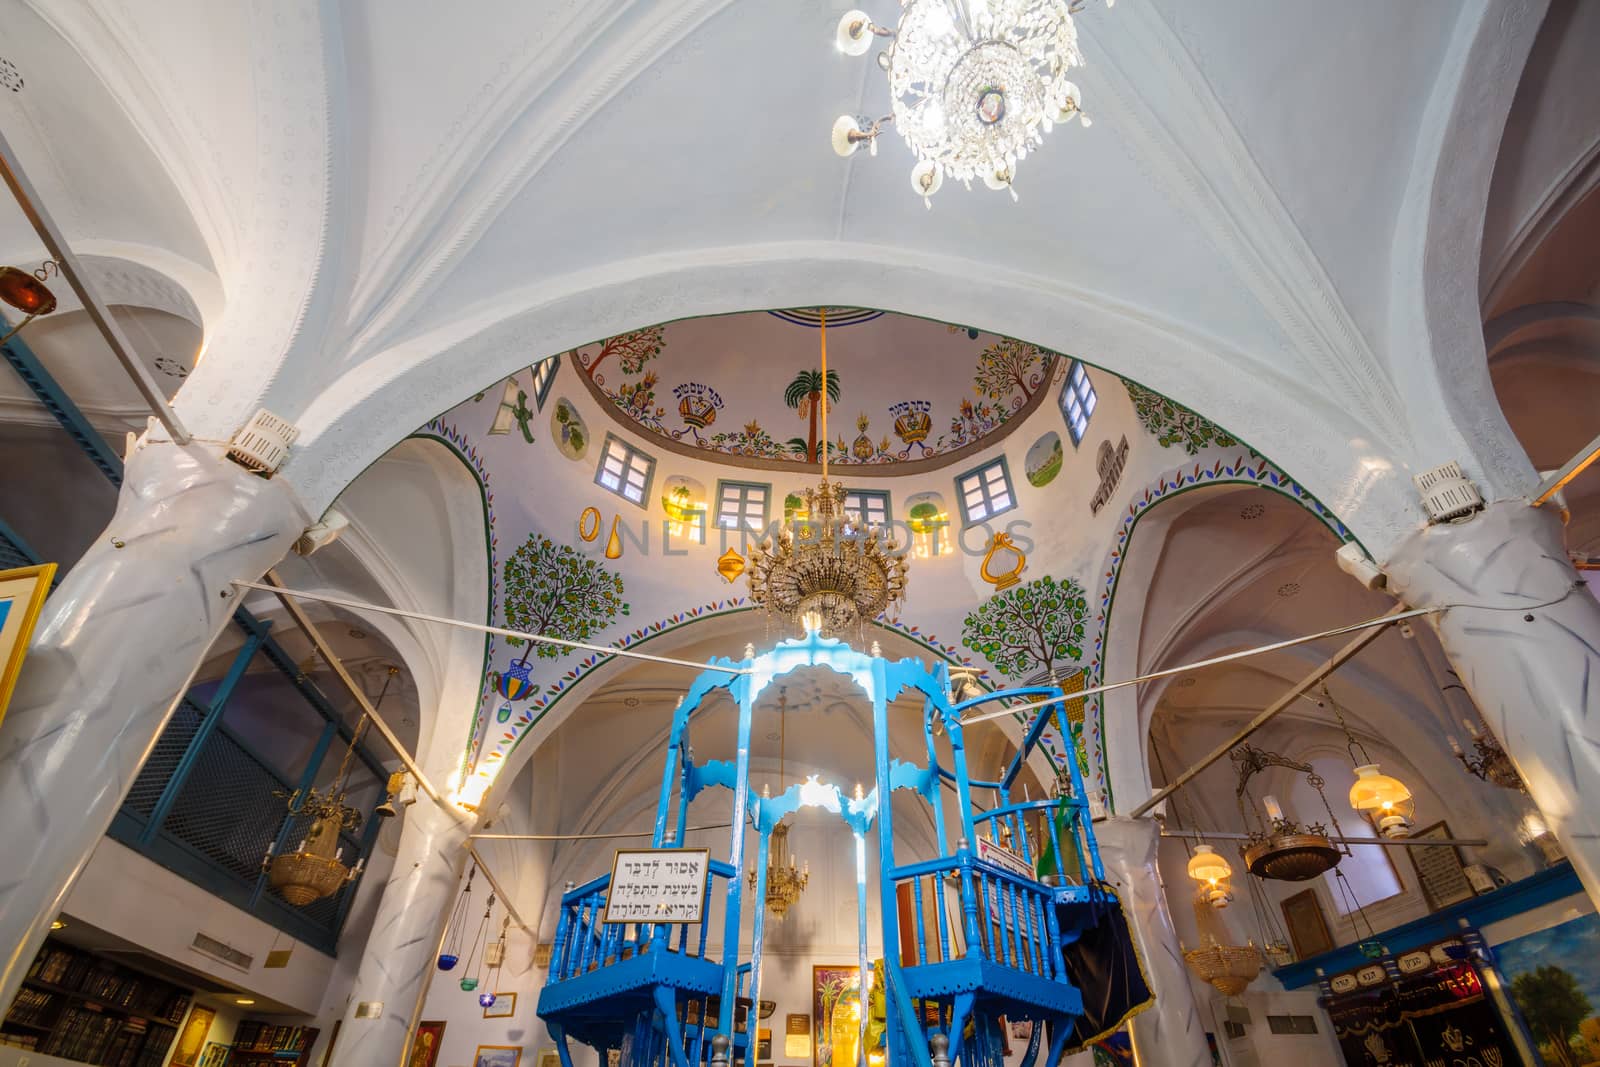 SAFED, ISRAEL - SEPTEMBER 14, 2016: The Abuhav Synagogue, in the Jewish quarter, in Safed (Tzfat), Israel. It is a 15th-century synagogue, named after the Spanish rabbi and kabbalist, Isaac Abuhav